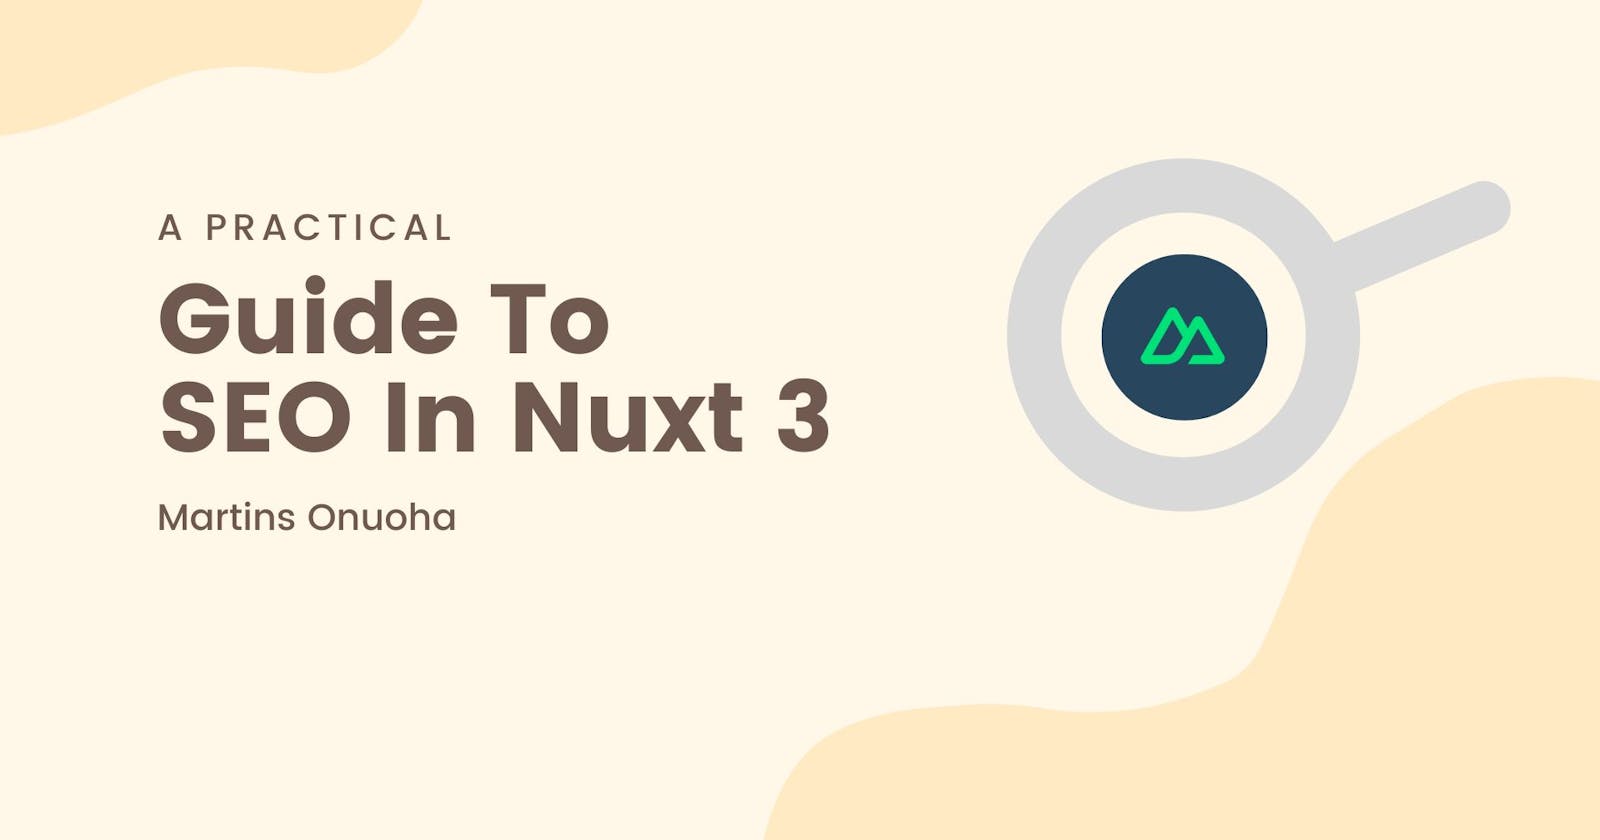 A Practical Guide To SEO In Nuxt 3